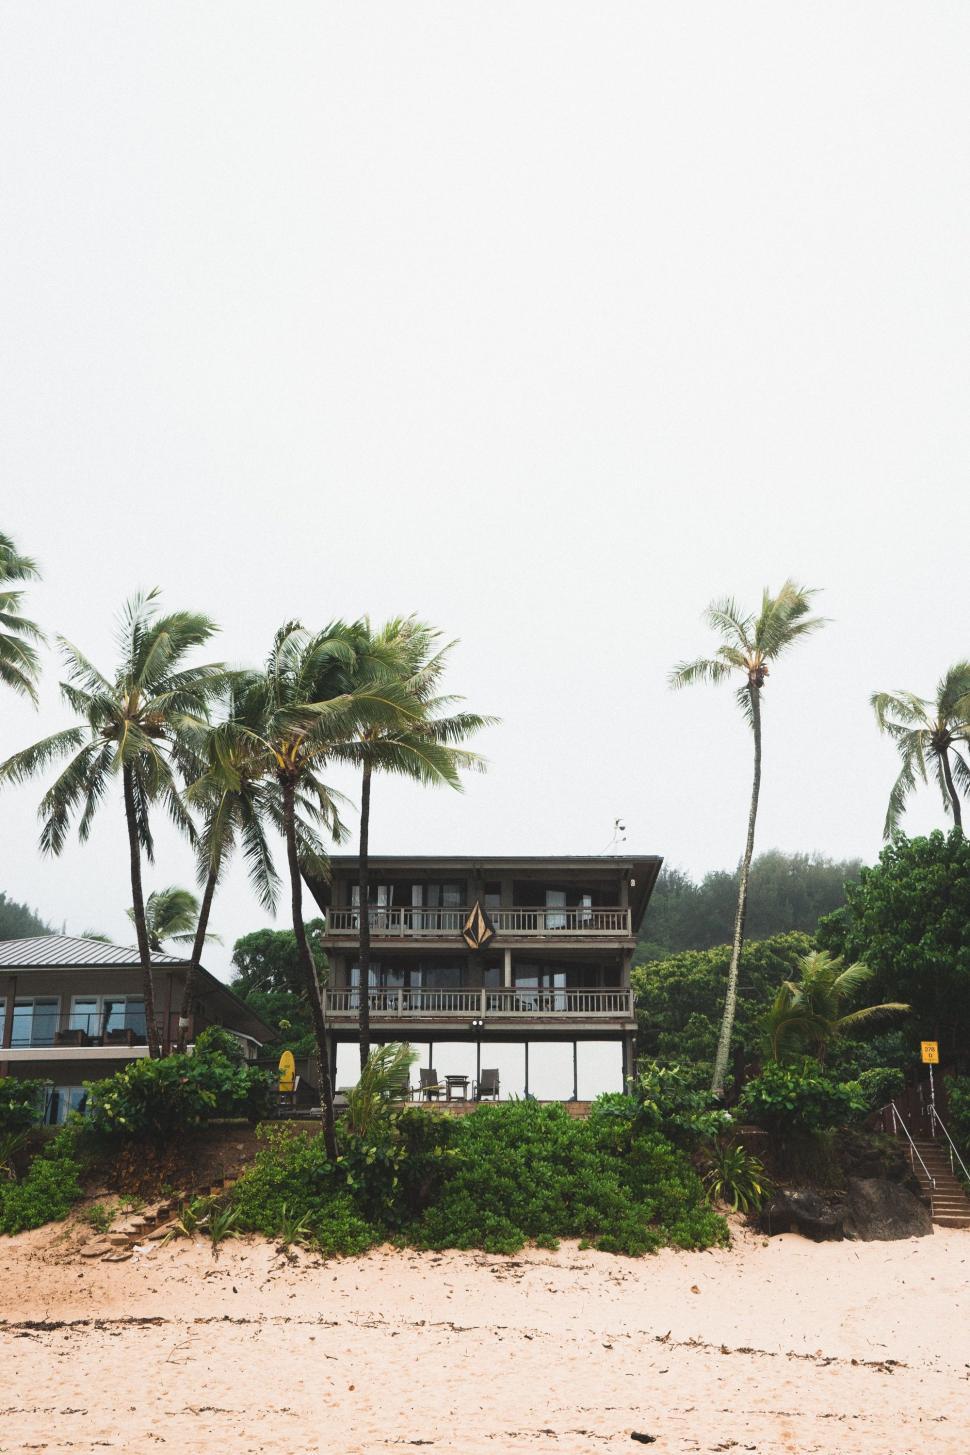 Free Image of House on Beach With Palm Trees 